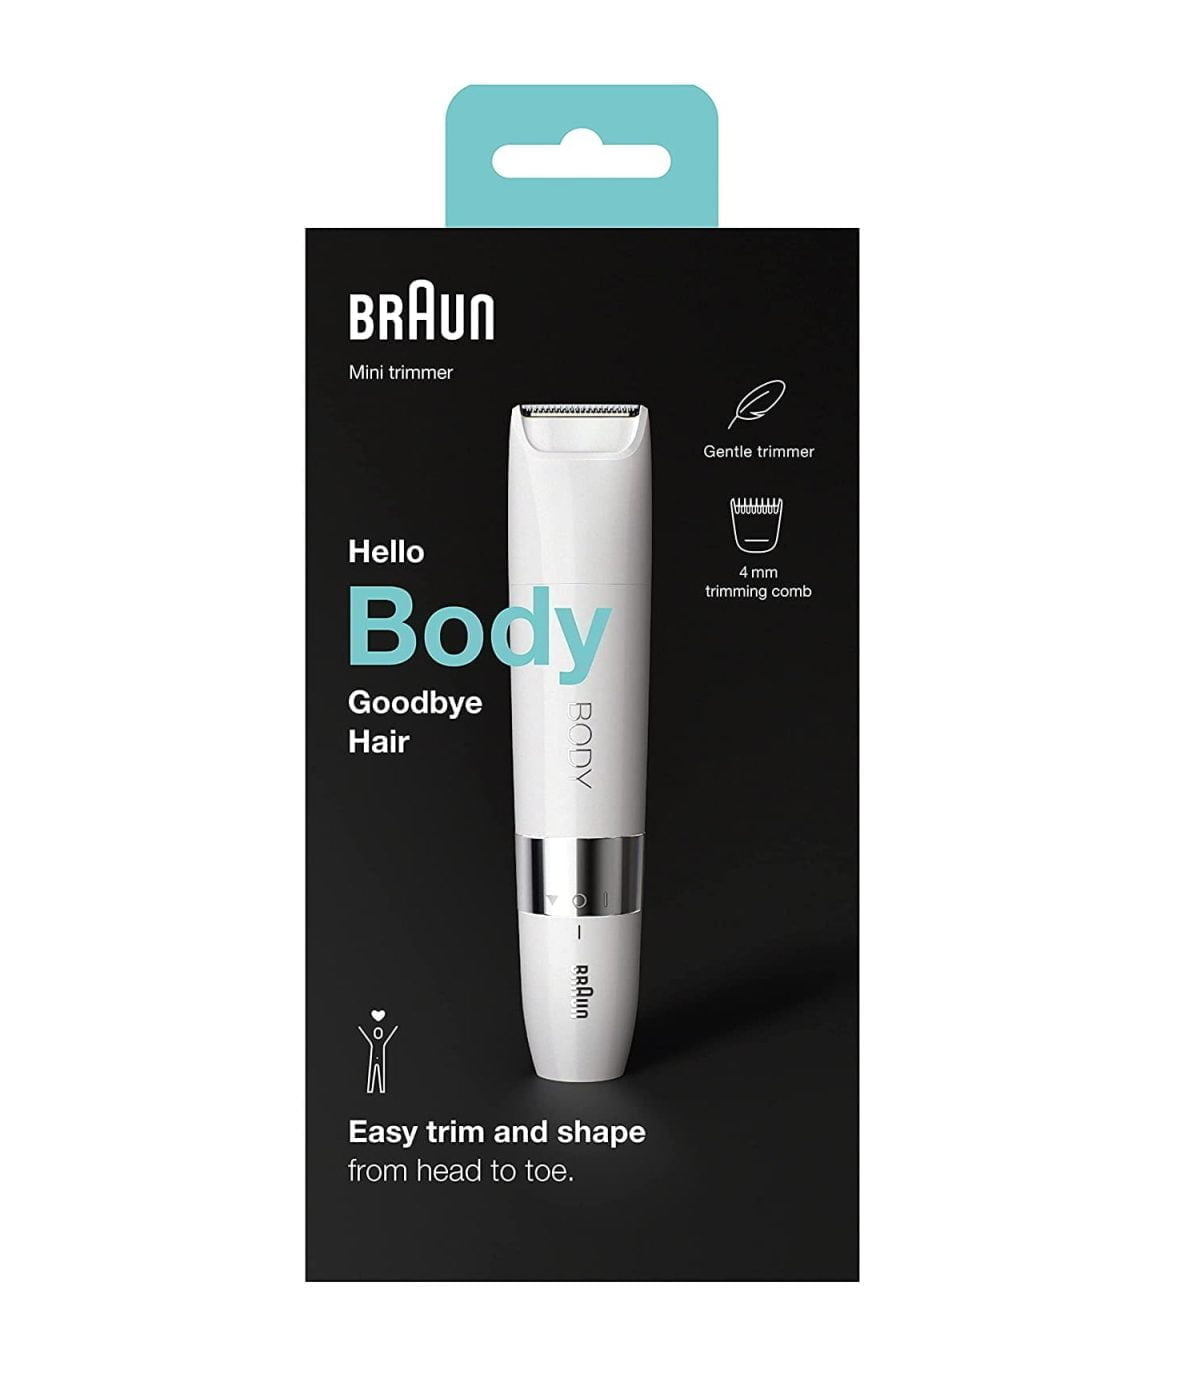 61Kqosztlms. Ac Sl1500 Braun &Lt;H1&Gt;Braun Body Mini Trimmer Bs1000, Electric Body Hair Removal For Women And Men, White&Lt;/H1&Gt; Https://Www.youtube.com/Watch?V=Z_Ryfvobyaw &Lt;Ul Class=&Quot;A-Unordered-List A-Vertical A-Spacing-Mini&Quot;&Gt; &Lt;Li&Gt;&Lt;Span Class=&Quot;A-List-Item&Quot;&Gt; Quick &Amp; Easy: Mini-Sized For Portability - Efficient Body Hair Removal &Lt;/Span&Gt;&Lt;/Li&Gt; &Lt;Li&Gt;&Lt;Span Class=&Quot;A-List-Item&Quot;&Gt; Gentle &Amp; Compact: Built For Efficient And Sensitive Body Hair T For Everybody &Lt;/Span&Gt;&Lt;/Li&Gt; &Lt;Li&Gt;&Lt;Span Class=&Quot;A-List-Item&Quot;&Gt; Wet &Amp; Dry: 100% Waterproof, For Use As You Prefer &Lt;/Span&Gt;&Lt;/Li&Gt; &Lt;Li&Gt;&Lt;Span Class=&Quot;A-List-Item&Quot;&Gt; Precise: German Cutting Technology For Precise Body Hair T And Shaping &Lt;/Span&Gt;&Lt;/Li&Gt; &Lt;Li&Gt;&Lt;Span Class=&Quot;A-List-Item&Quot;&Gt; Multipurpose: Usable For Hair Removal T And Shaping On Different Areas Of Your Body &Lt;/Span&Gt;&Lt;/Li&Gt; &Lt;/Ul&Gt; Body Hair Removal Braun Body Mini Trimmer Bs1000, Electric Body Hair Removal For Women And Men, White